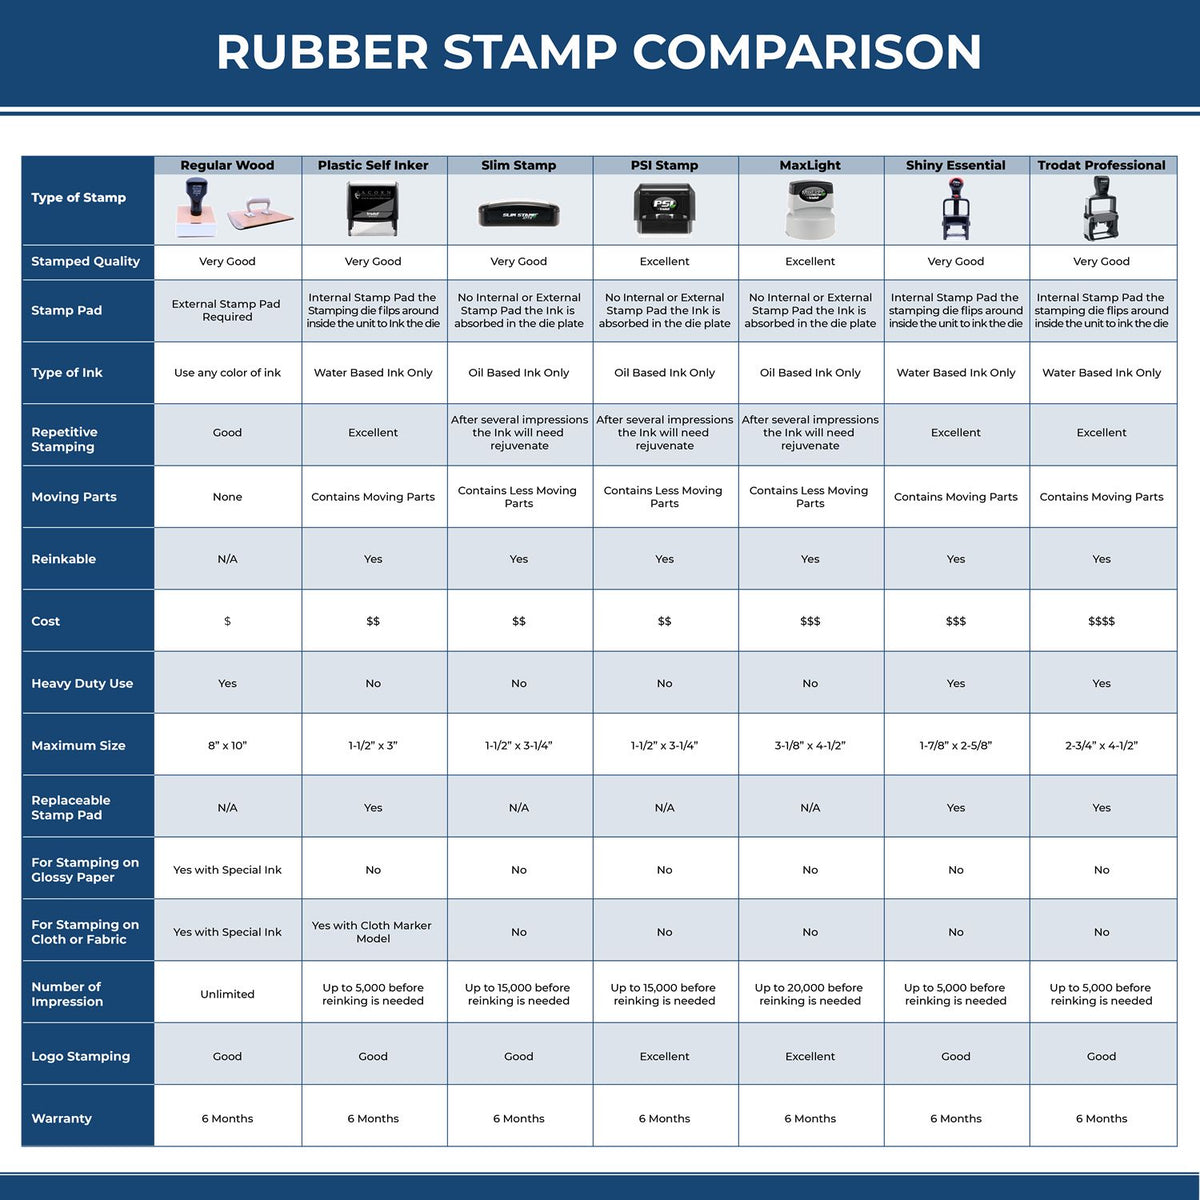 Large Self Inking Court Copy Stamp 4614S Rubber Stamp Comparison